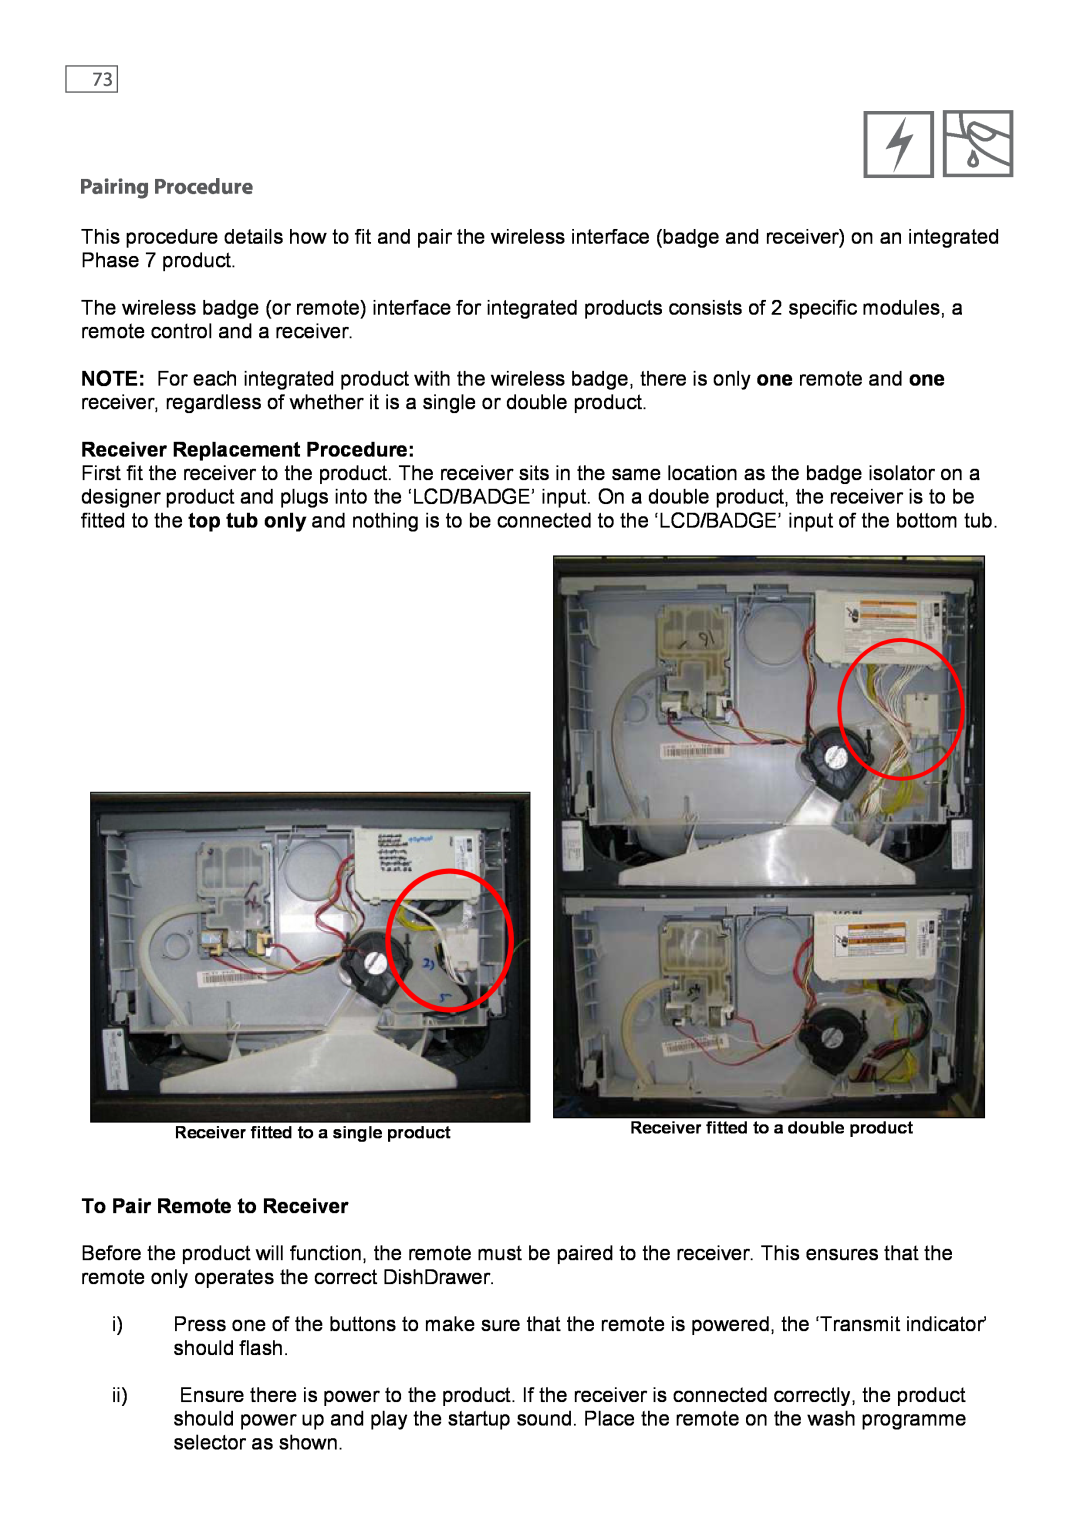 Fisher & Paykel DD247, DD607 service manual Pairing Procedure, Receiver Replacement Procedure, To Pair Remote to Receiver 